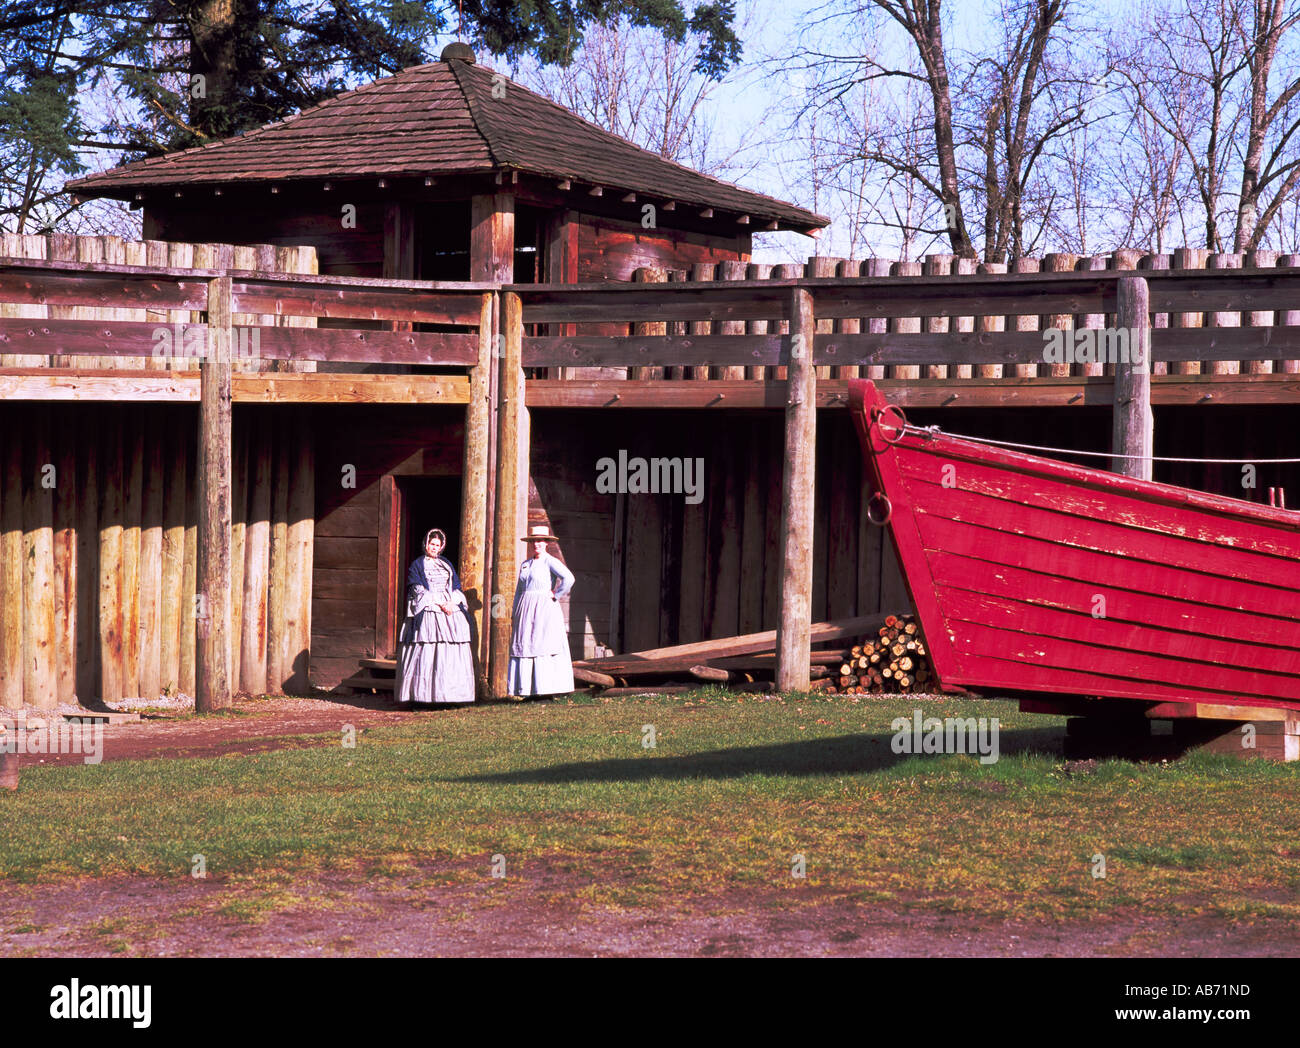 Re-enactors posing at a Bastion and a Supply Bateau at Fort Langley in the Fraser Valley of Southwestern British Columbia Canada Stock Photo